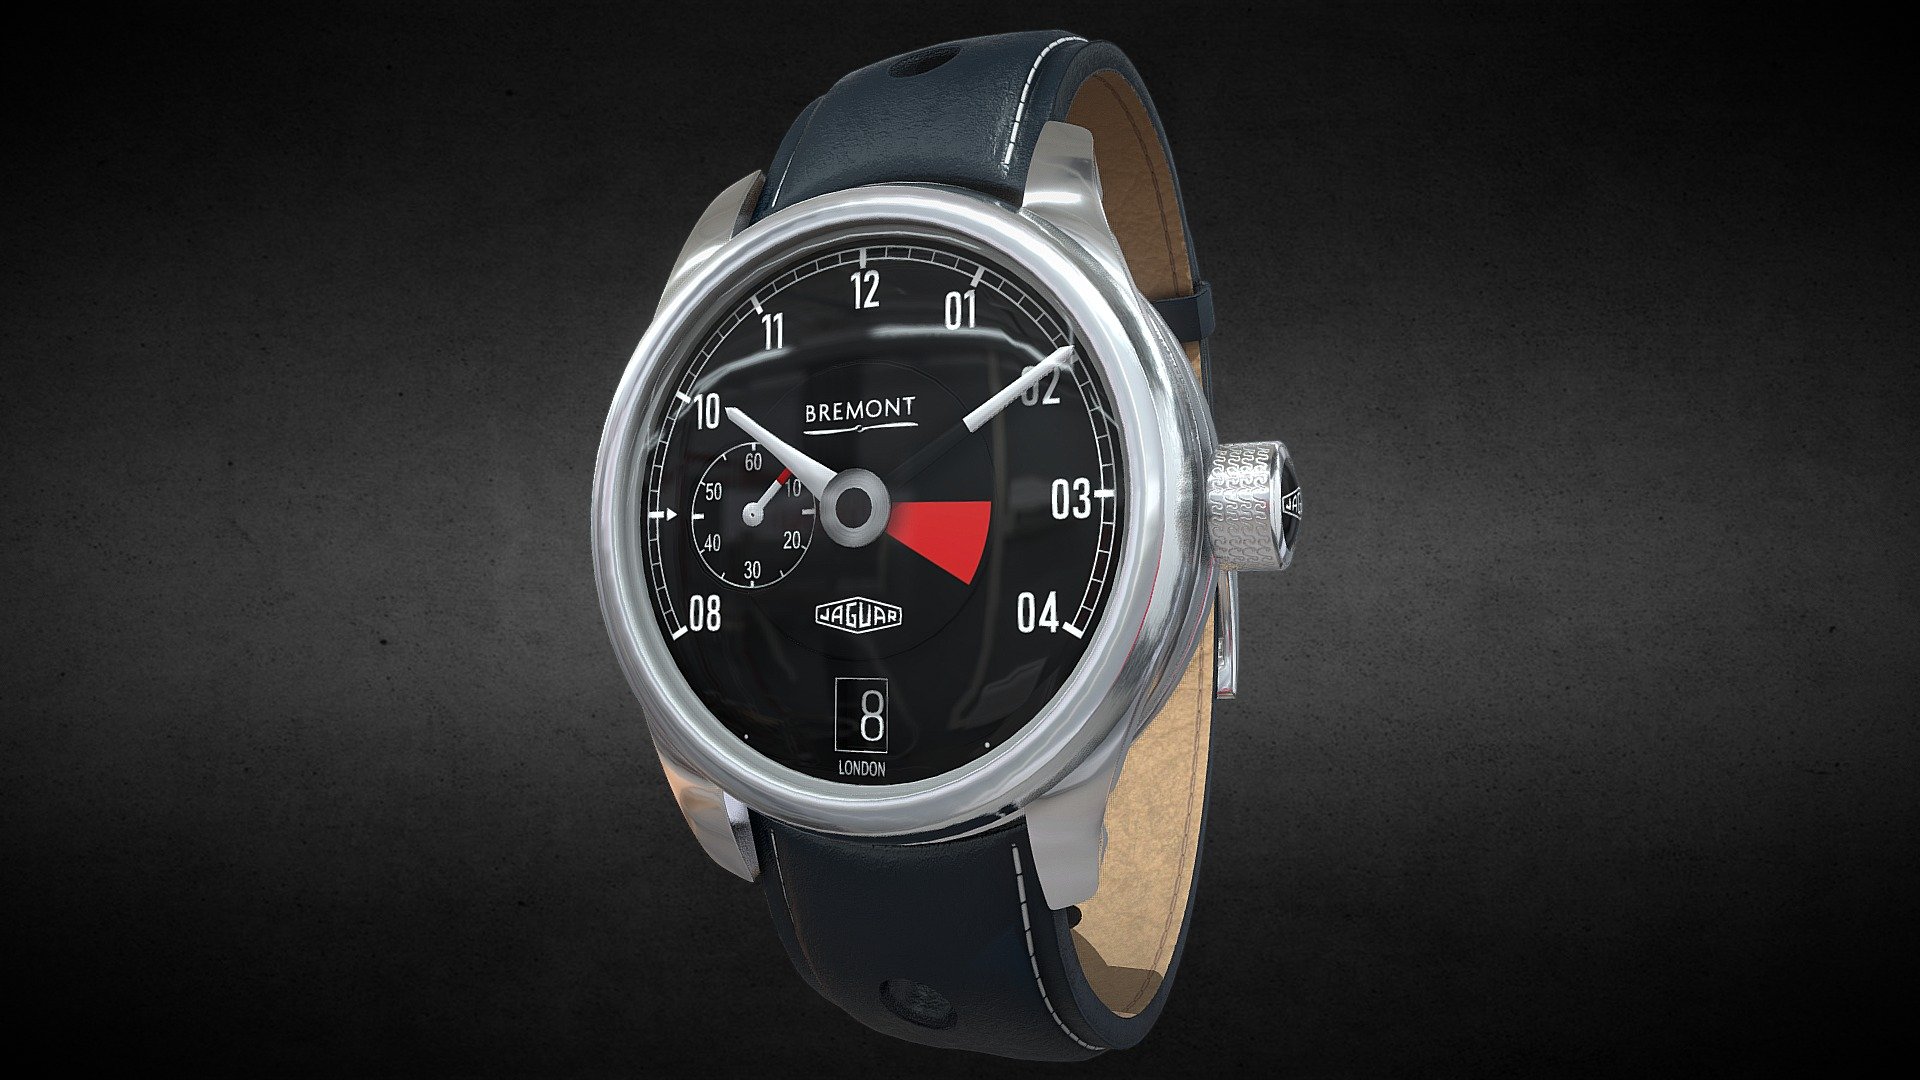 Awesome stainless steel BREMONT JAGUAR MKI Watch․
Use for Unreal Engine 4 and Unity3D. Try in augmented reality in the AR-Watches app. 
Links to the app: Android, iOS

Currently available for download in FBX format.

3D model developed by AR-Watches

Disclaimer: We do not own the design of the watch, we only made the 3D model 3d model